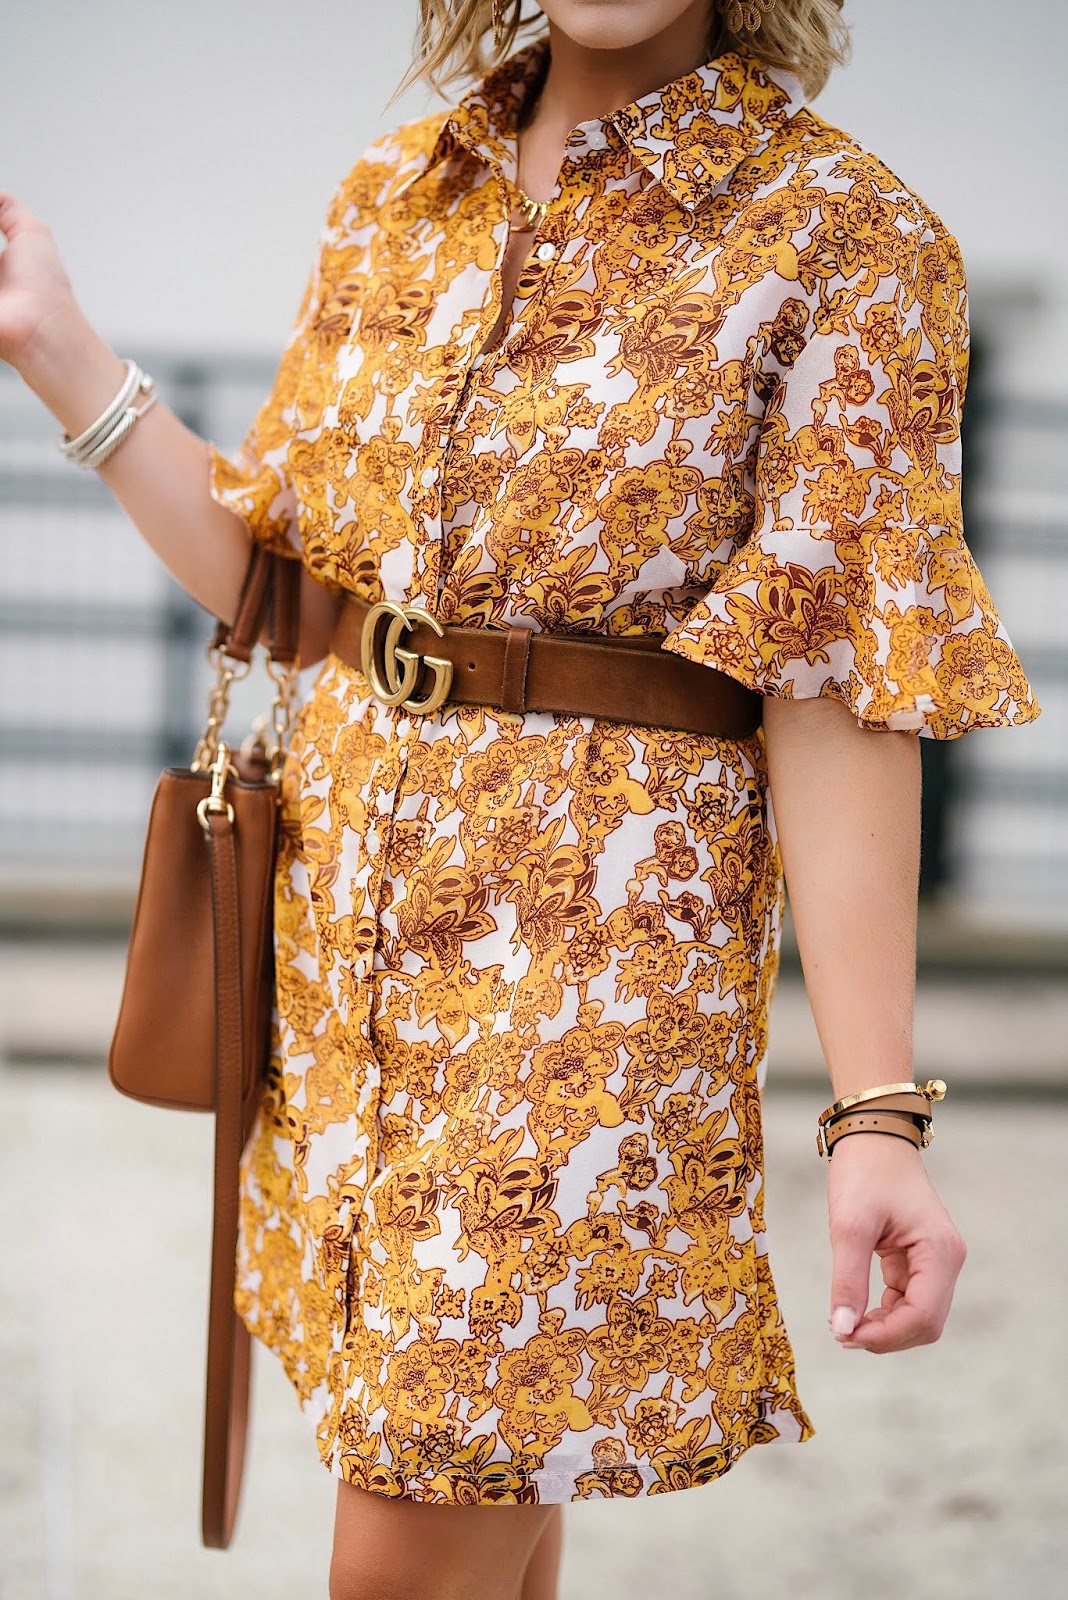 The Perfect Dress To Transition Into Fall: $60 Ruffle Sleeve Shirt Dress - Something Delightful Blog